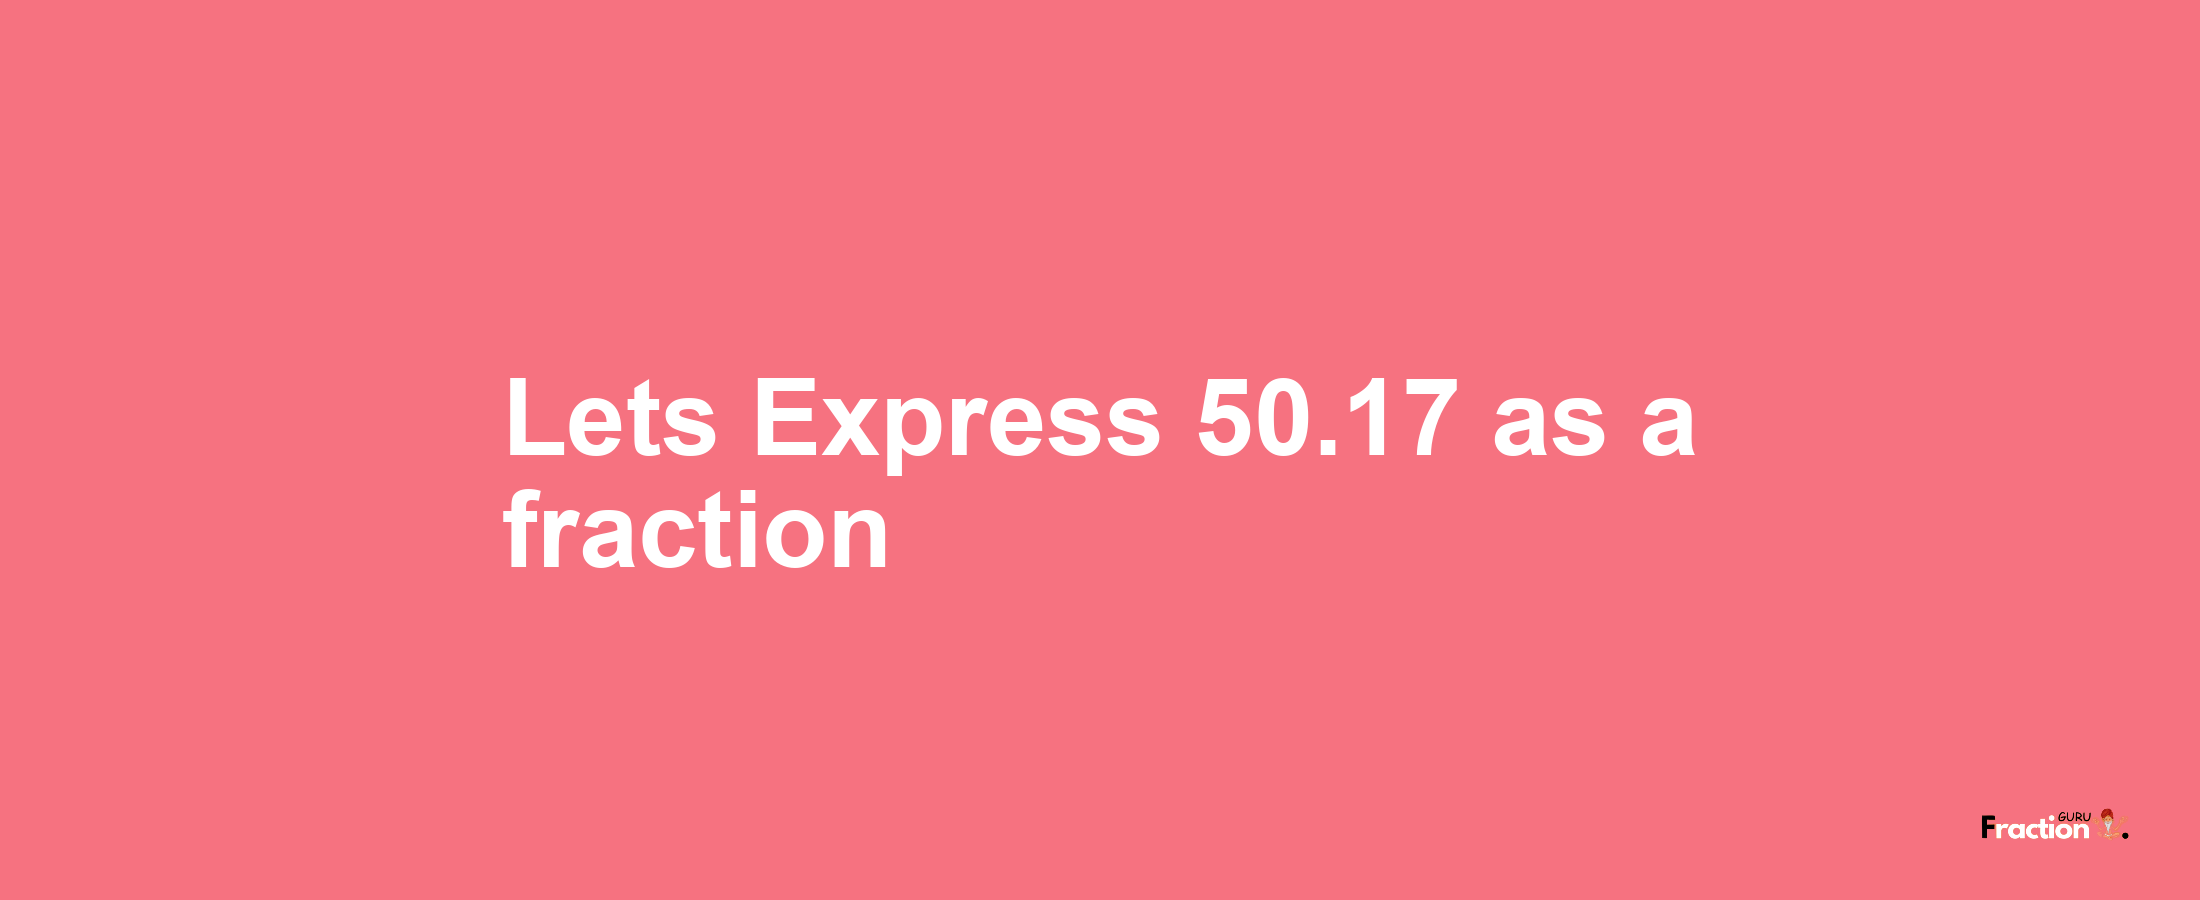 Lets Express 50.17 as afraction